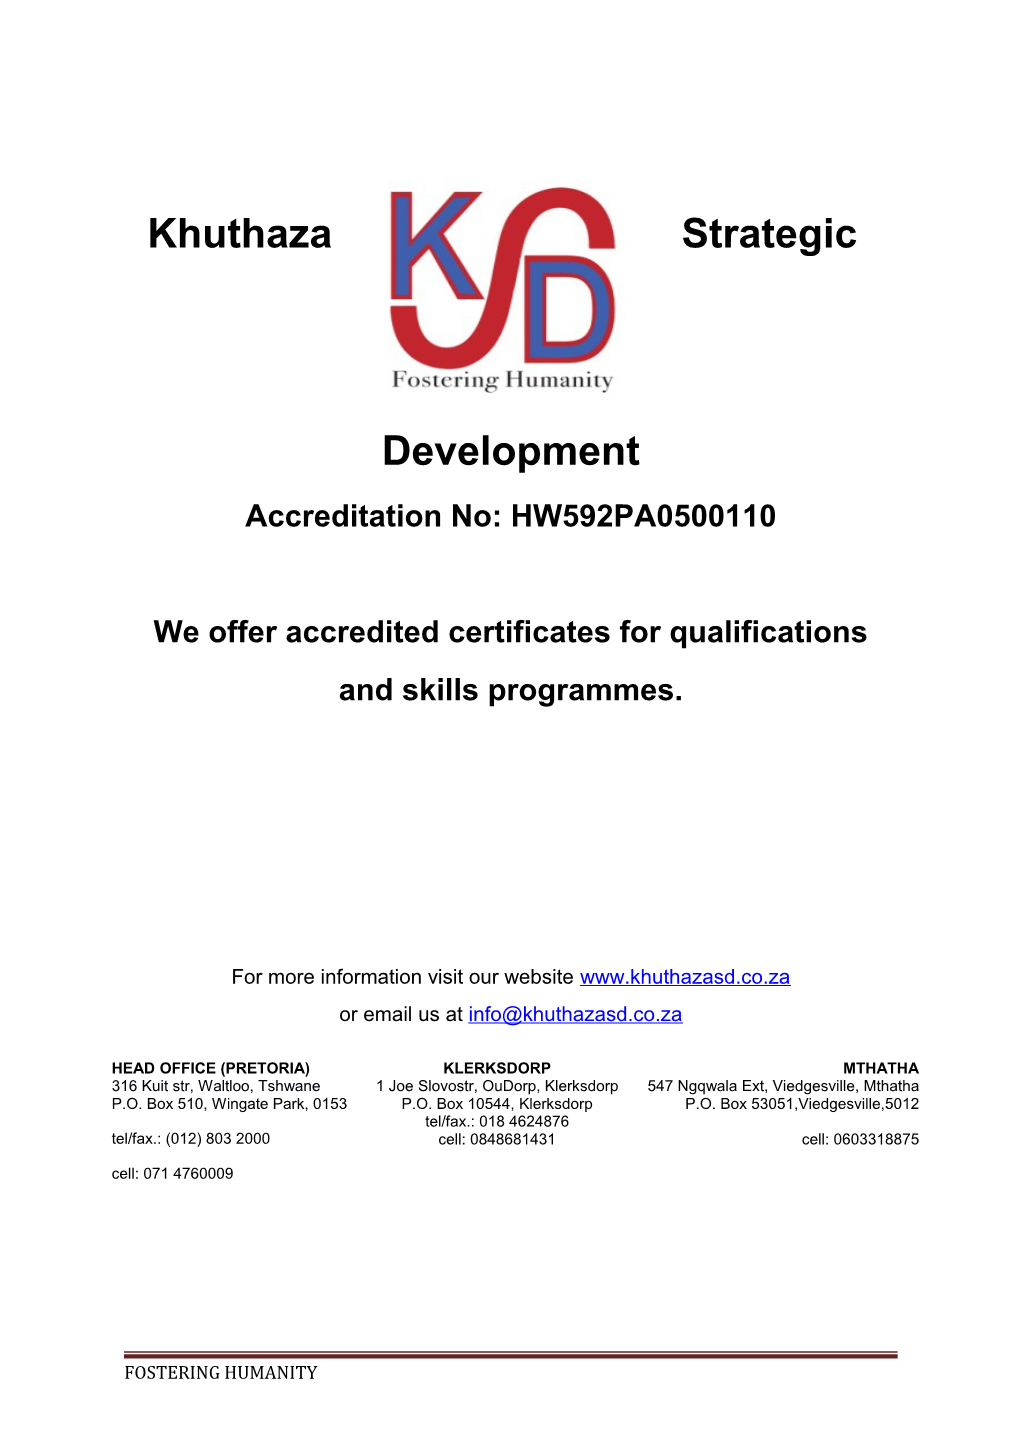 We Offer Accredited Certificates for Qualifications